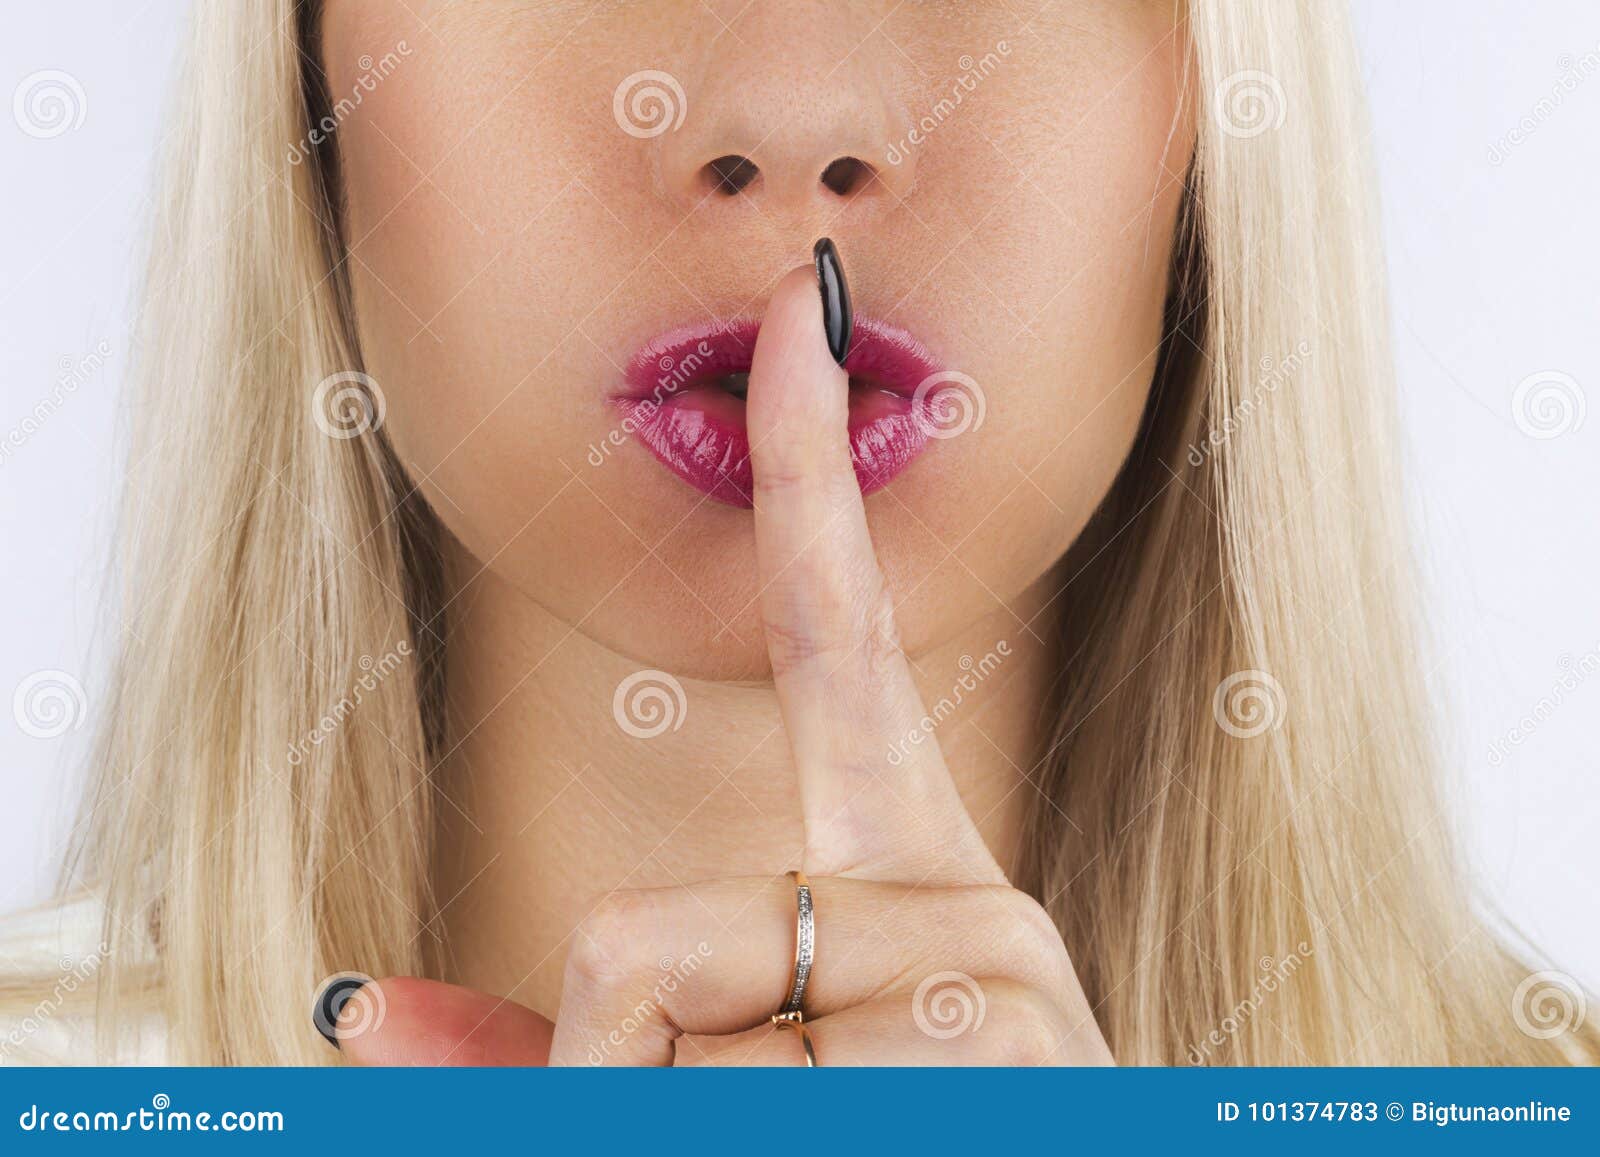 shh! women`s secrets. beautiful blond woman holding her finger to her pink lips in a gesture for silence. making silence sign with